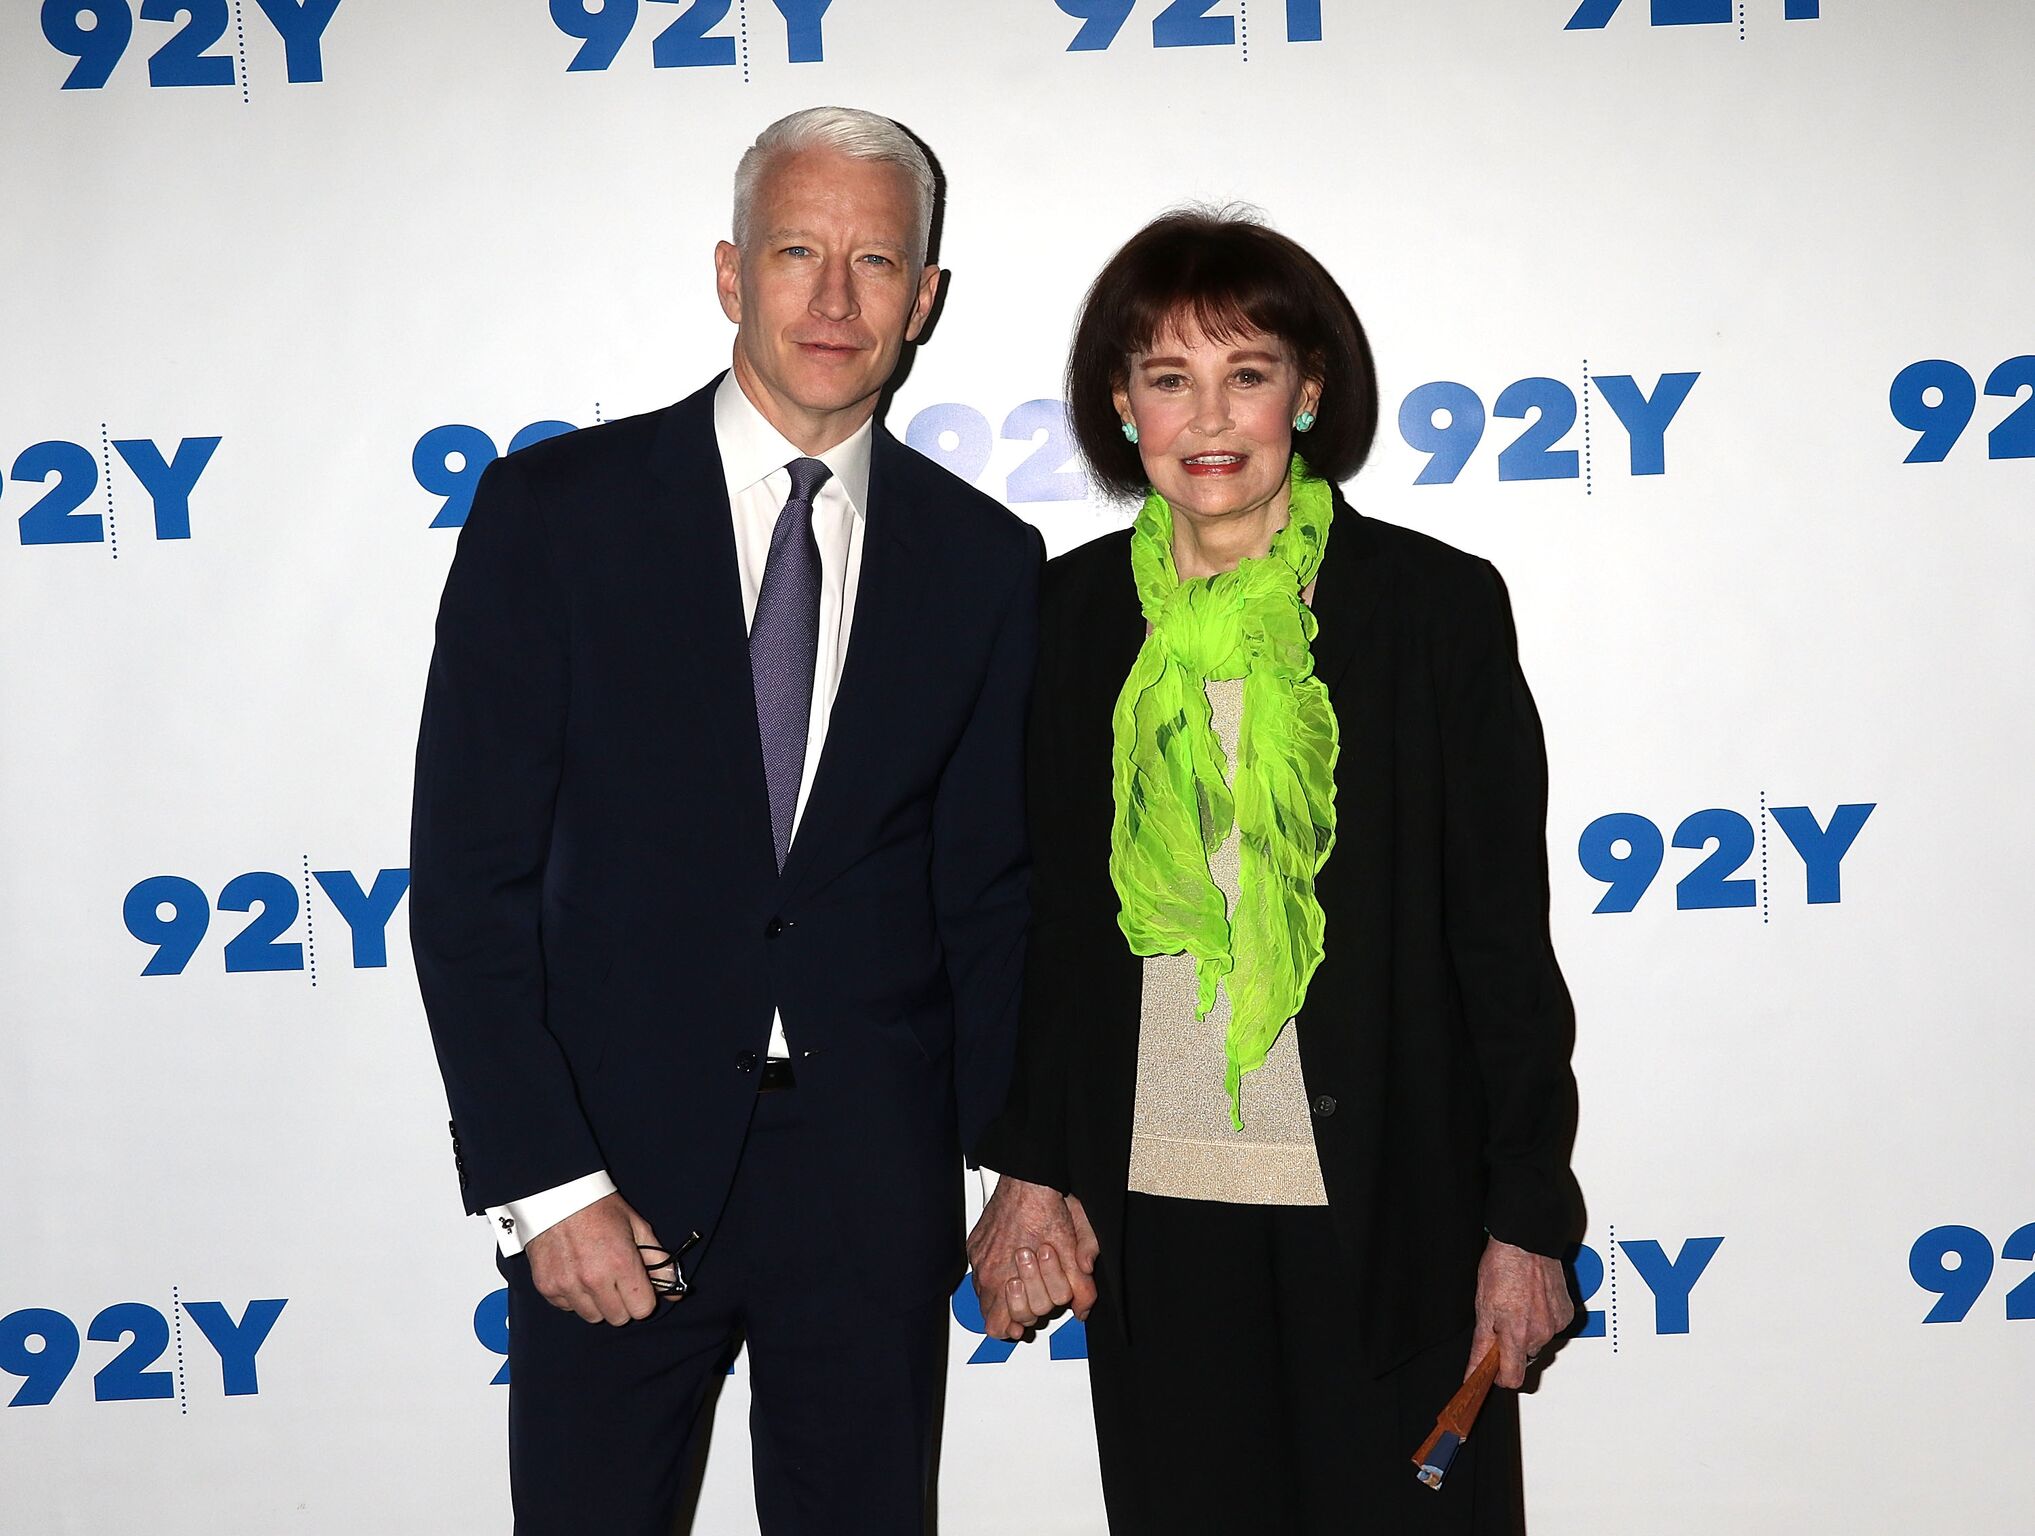  Anderson Cooper and Gloria Vanderbilt attend A Conversation with Anderson Cooper and Gloria Vanderbilt | Getty Images